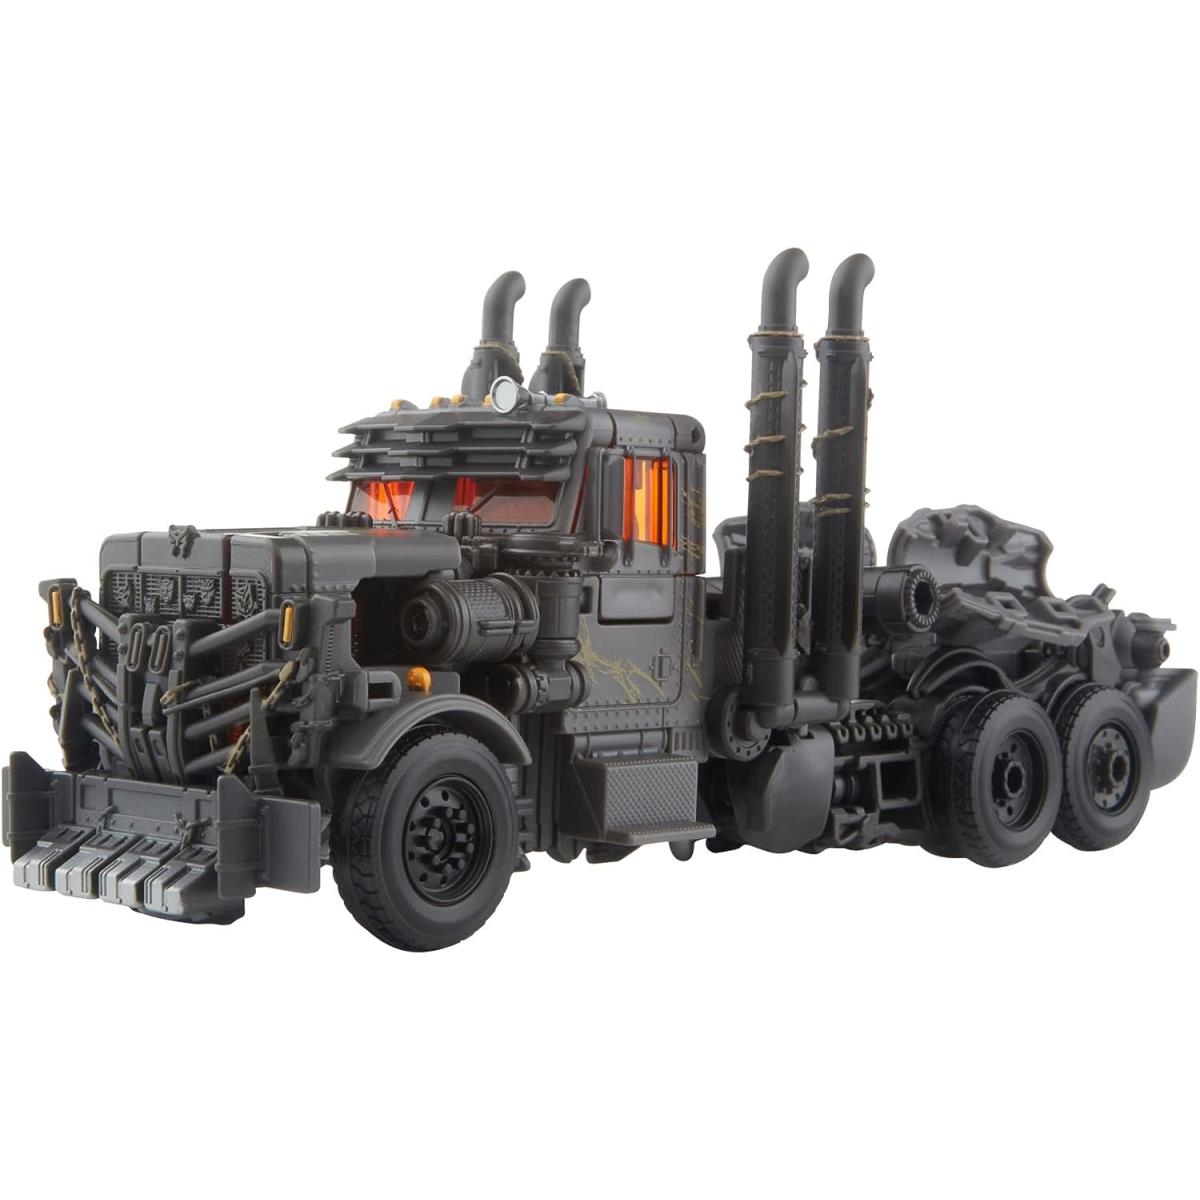 Transformers Toys Studio Series Leader Class 101 Scourge Toy 8.5-inch